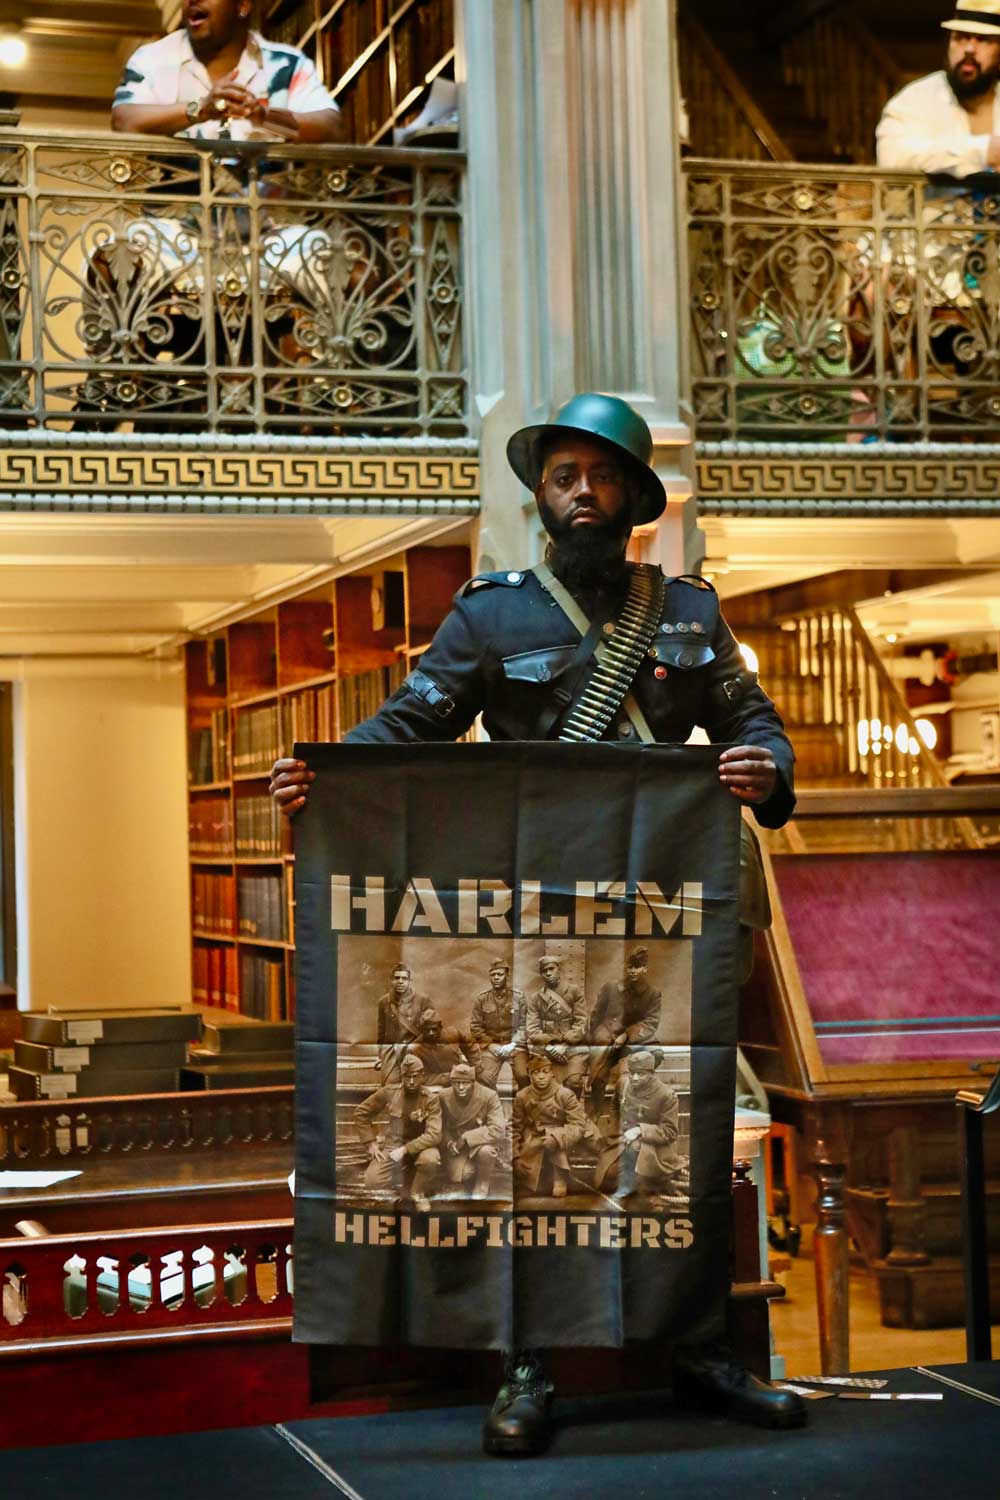 A performer on the stage at the George Peabody Library